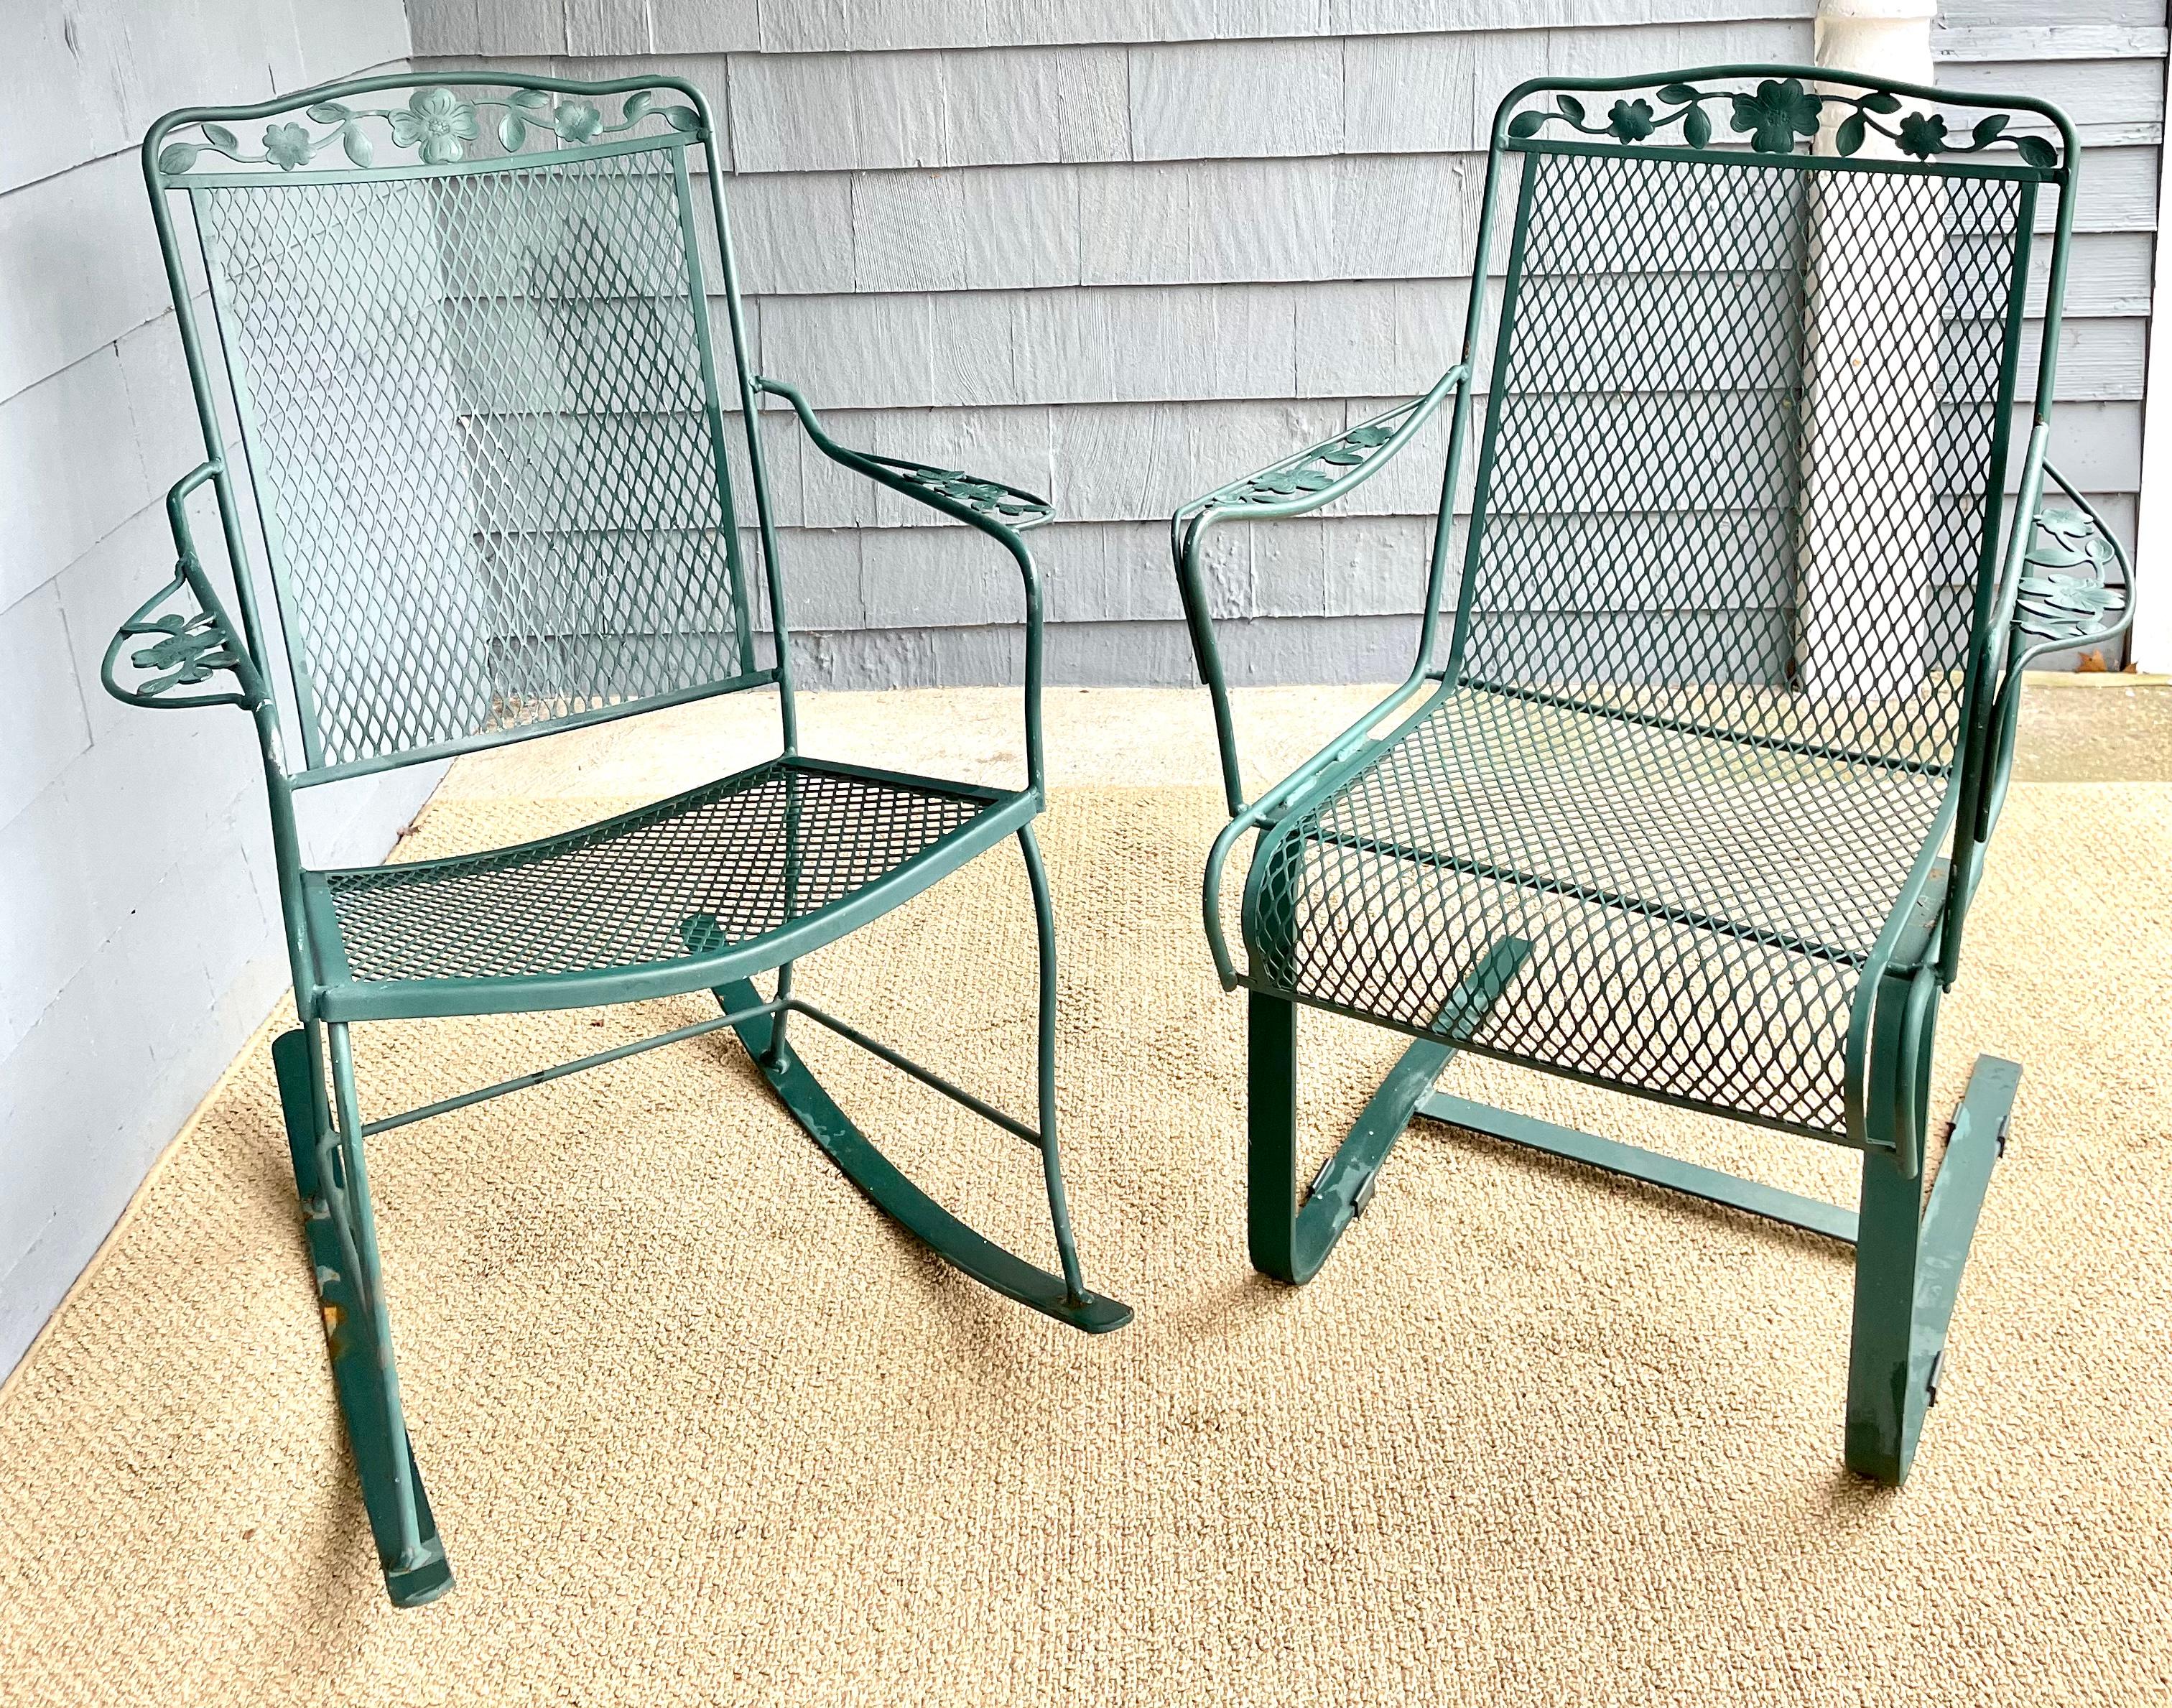 Available now and ready to ship for your enjoyment is a Pair of Wrought Iron Outdoor Patio Chairs. This pair of sustainable Wrought Iron Patio Chairs will last decades to come being made out of heavy wrought iron. The Rocker Arm Chair and Bouncer